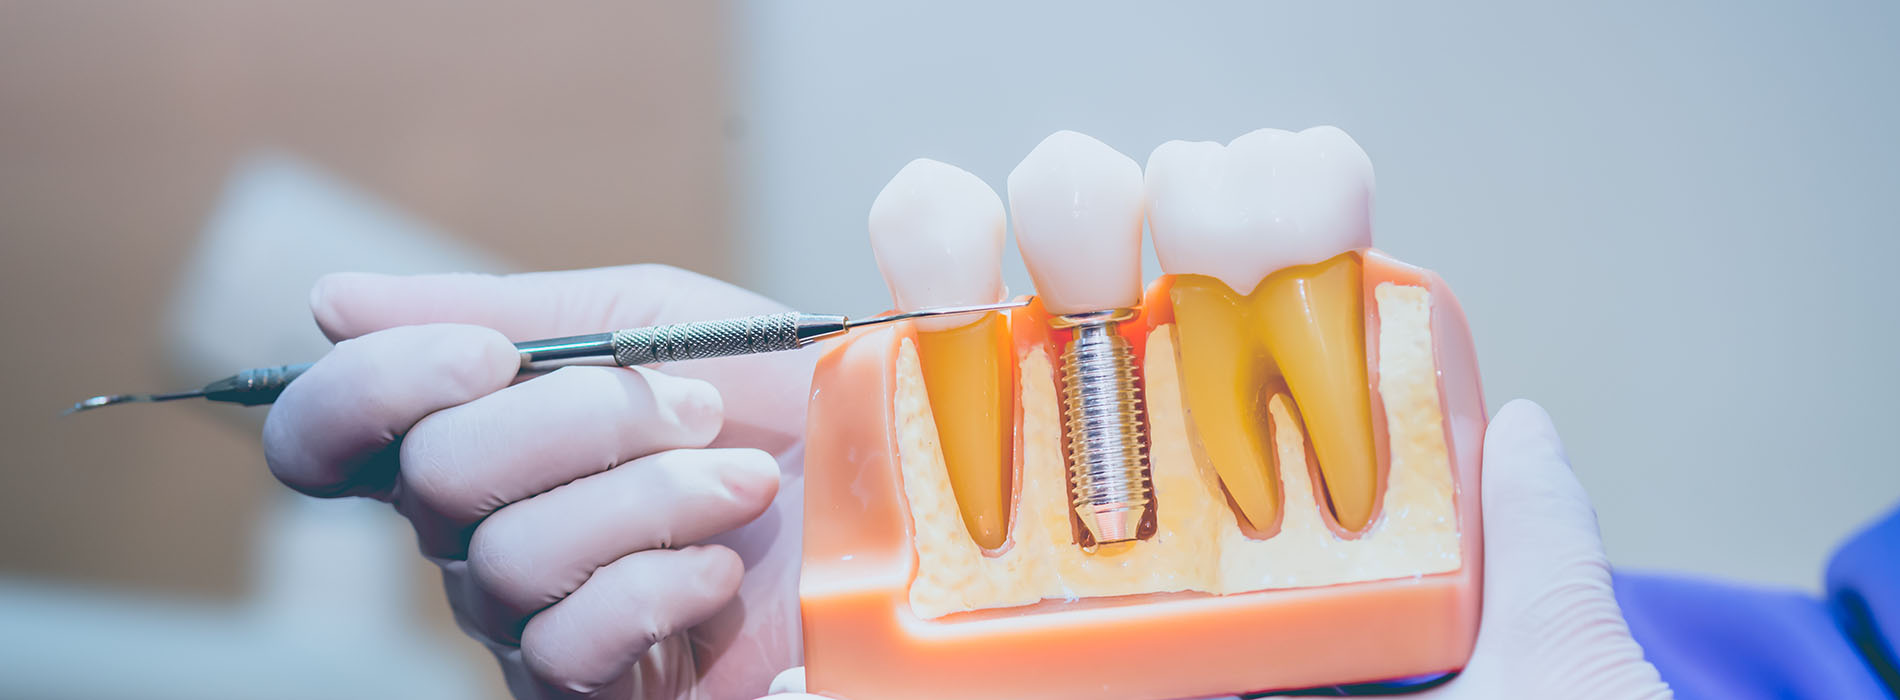 Modern Dental Care of Queens | Cosmetic Dentistry, Dental Fillings and CEREC